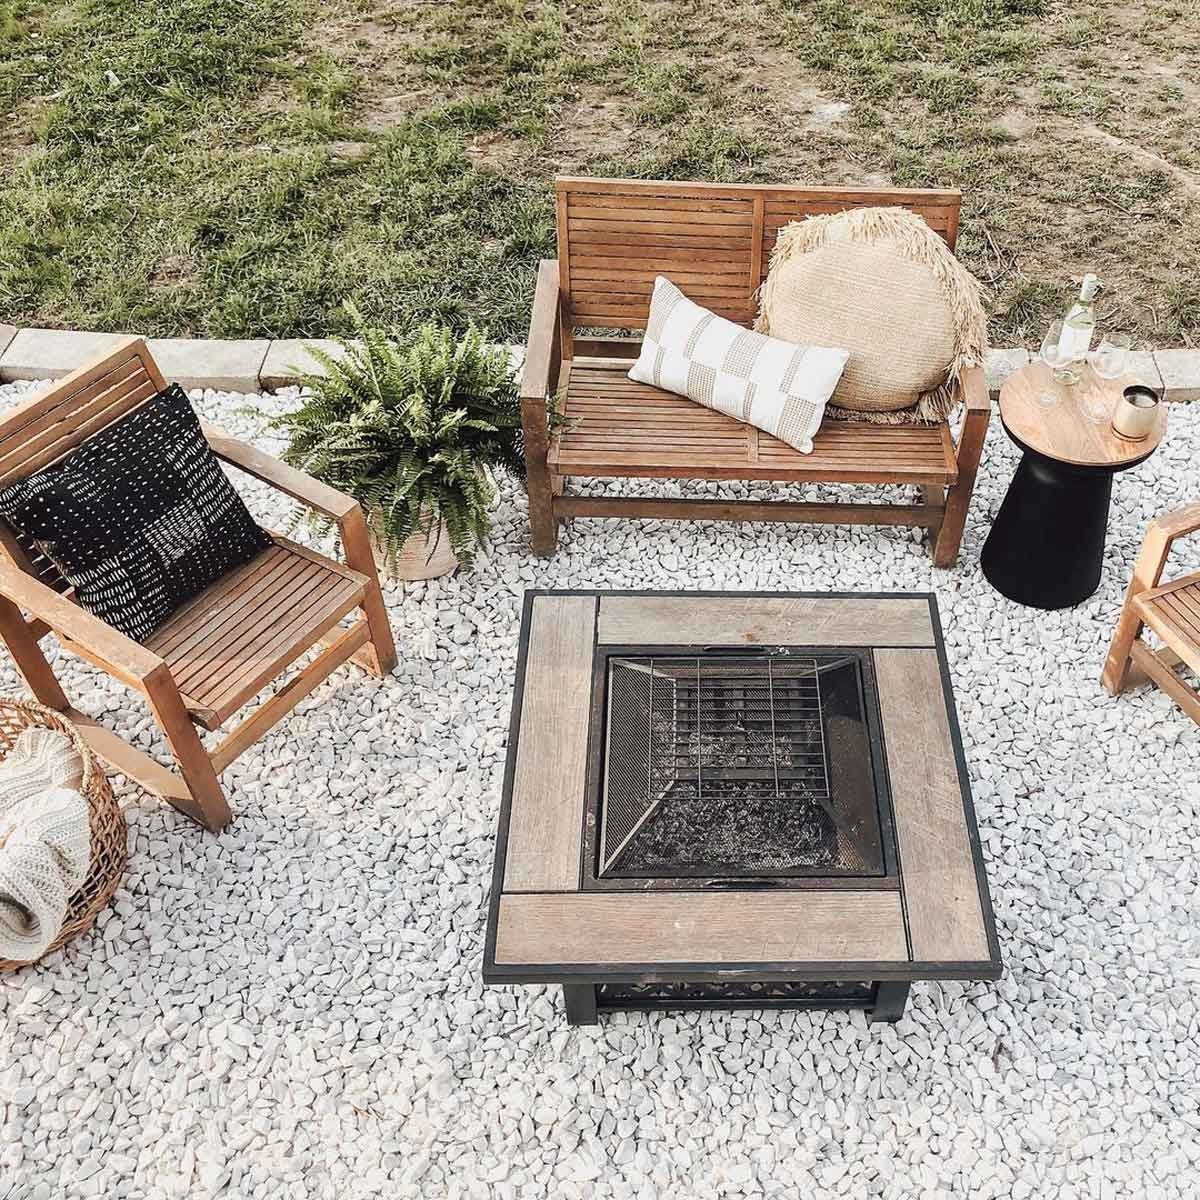 10 Best Outdoor Fire Pit Seating Ideas